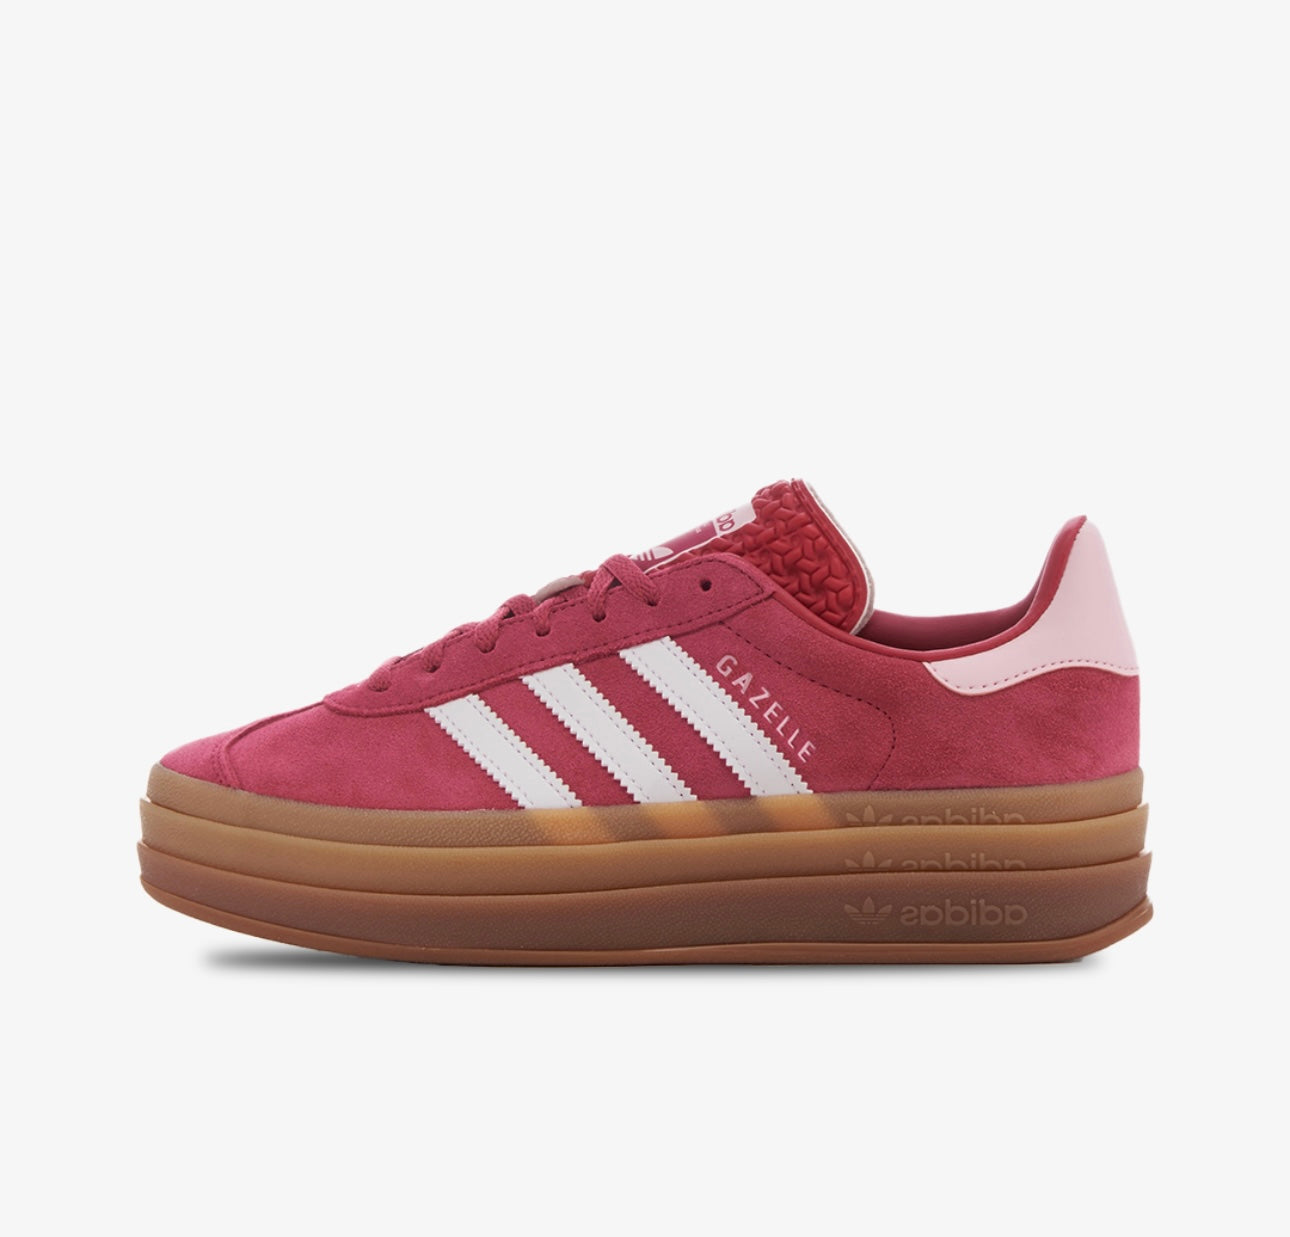 Adidas Gazelle Bold Wild Pink - Lit Fitters Portugal